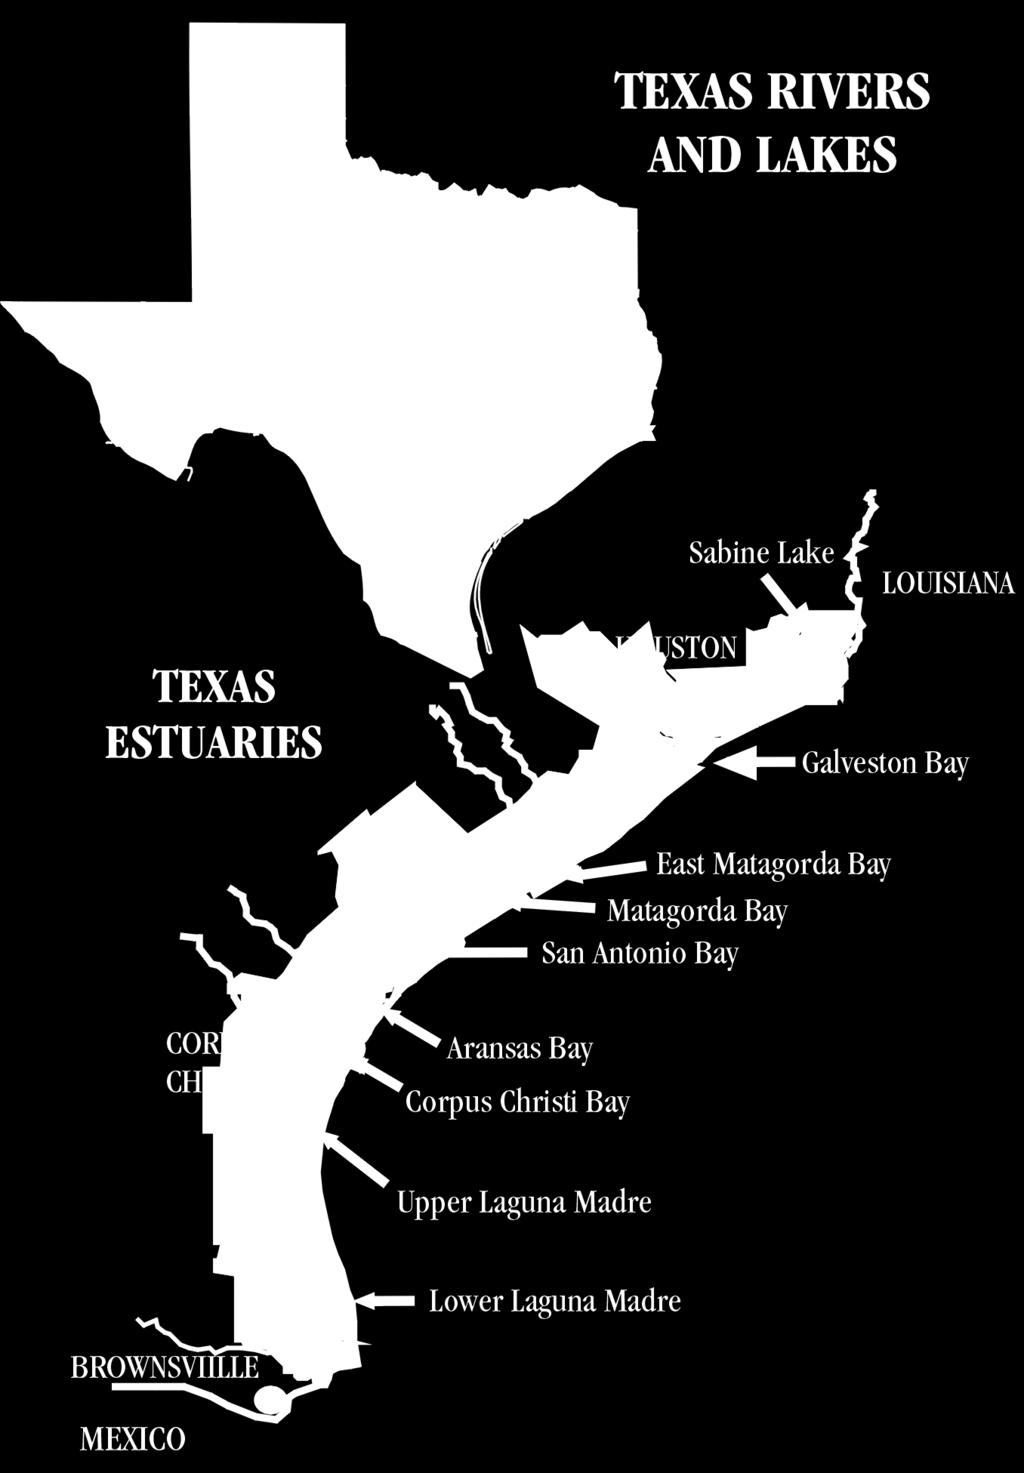 4 Gulf coast estuaries and bays, fed by freshwater inflows, contain coastal wetlands which are home to 95% of the recreational and commercially important fish species found in the Gulf of Mexico.